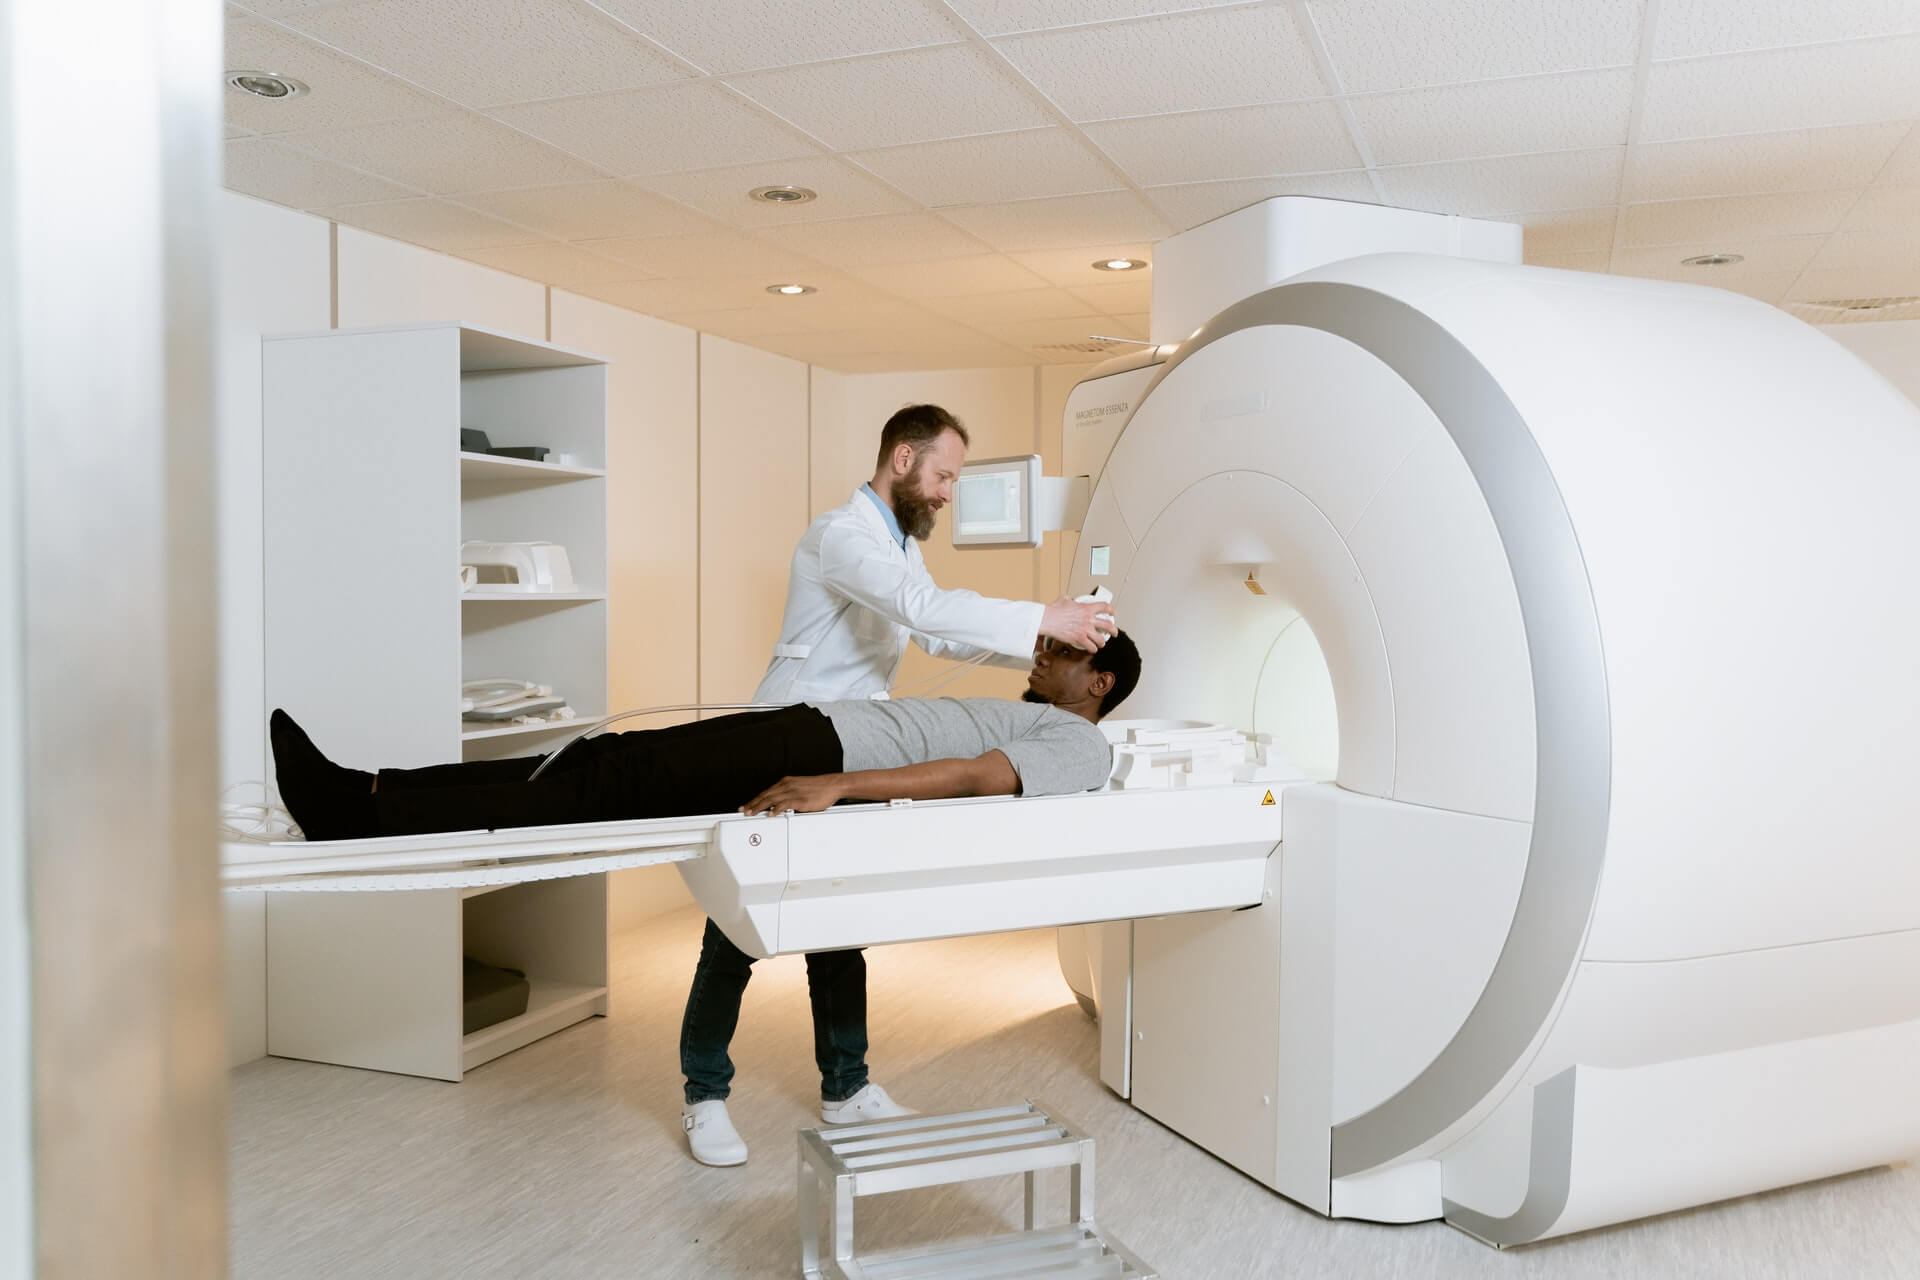 MRI checkup and report in a day